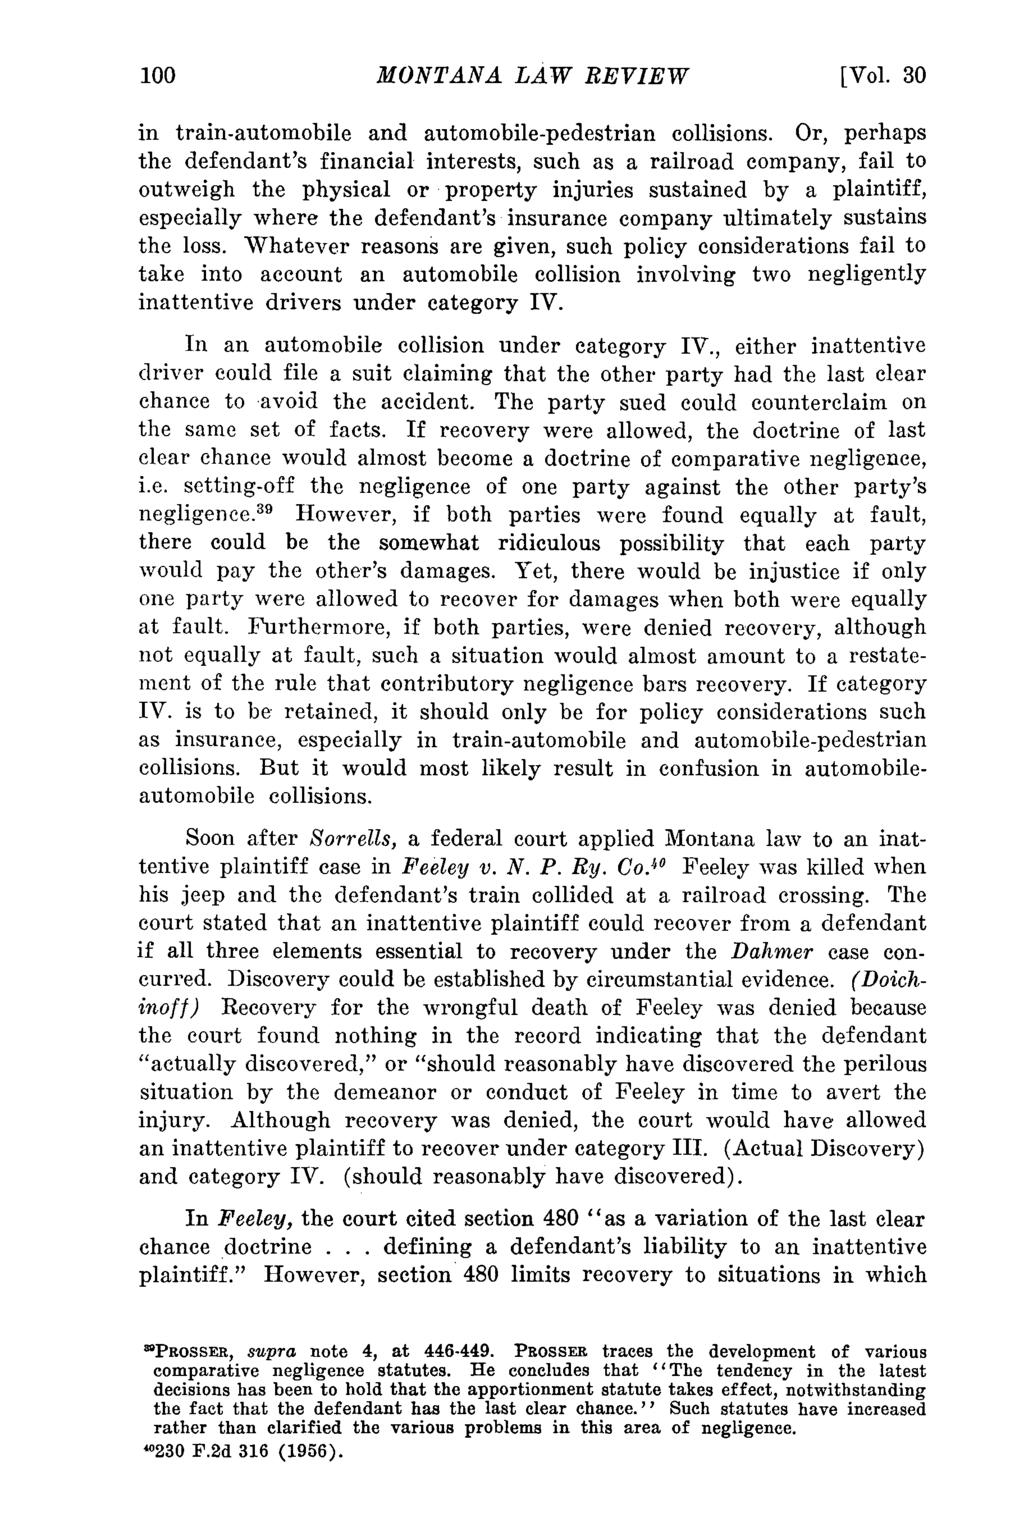 Montana Law Review, Vol. 30 [1968], Iss. 1, Art. 8 MONTANA LAW REVIEW [Vol. 30 in train-automobile and automobile-pedestrian collisions.